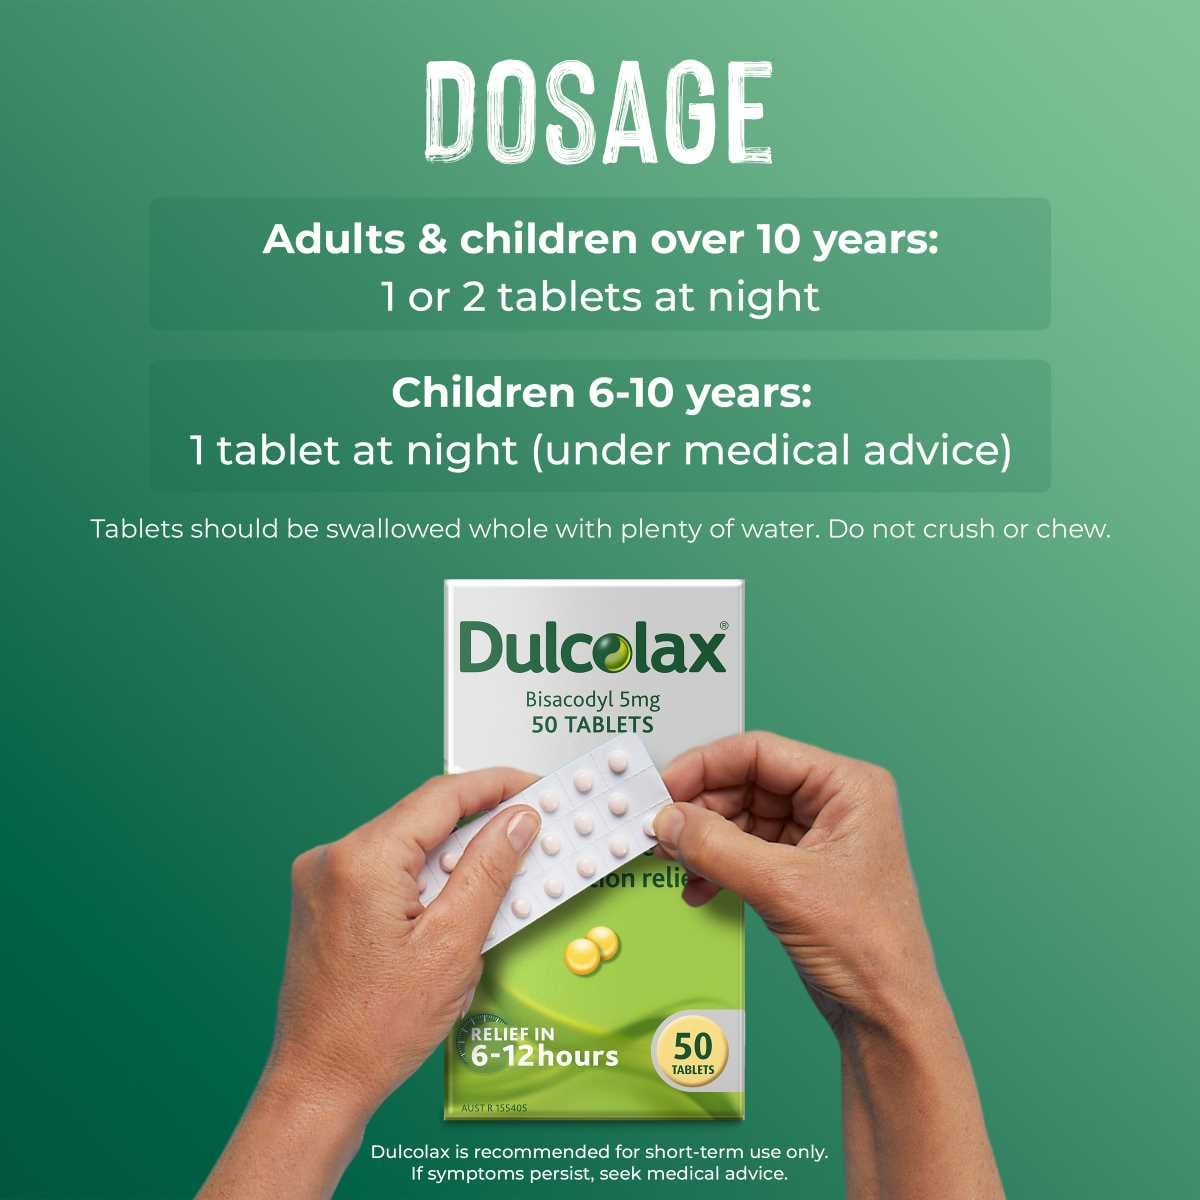 Dulcolax Laxatives for Constipation Relief 50 Tablets